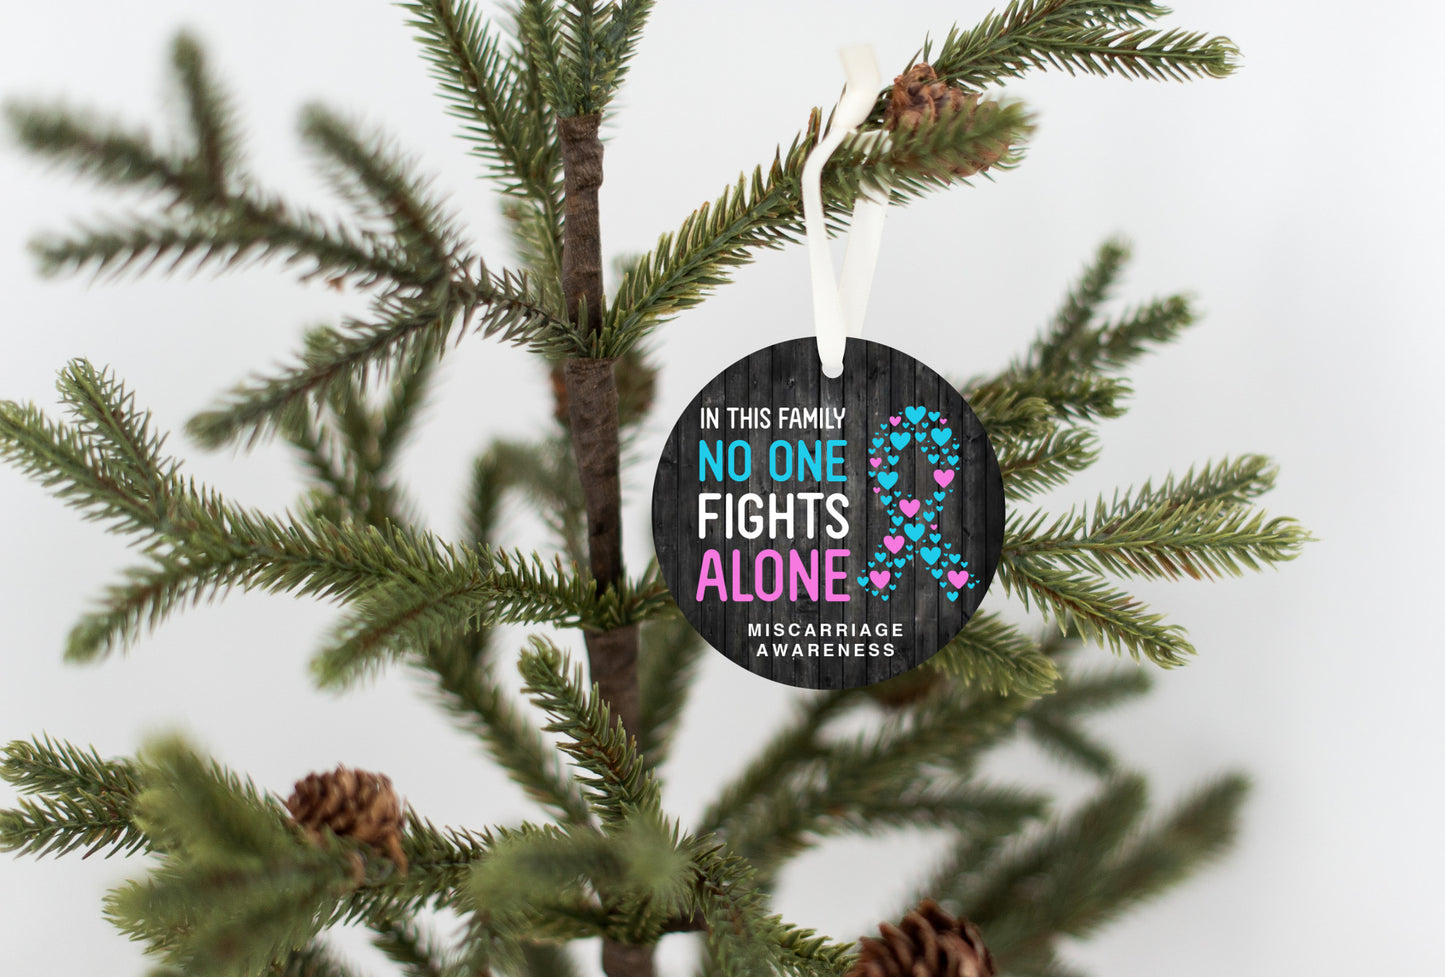 Miscarriage Awareness Ornament